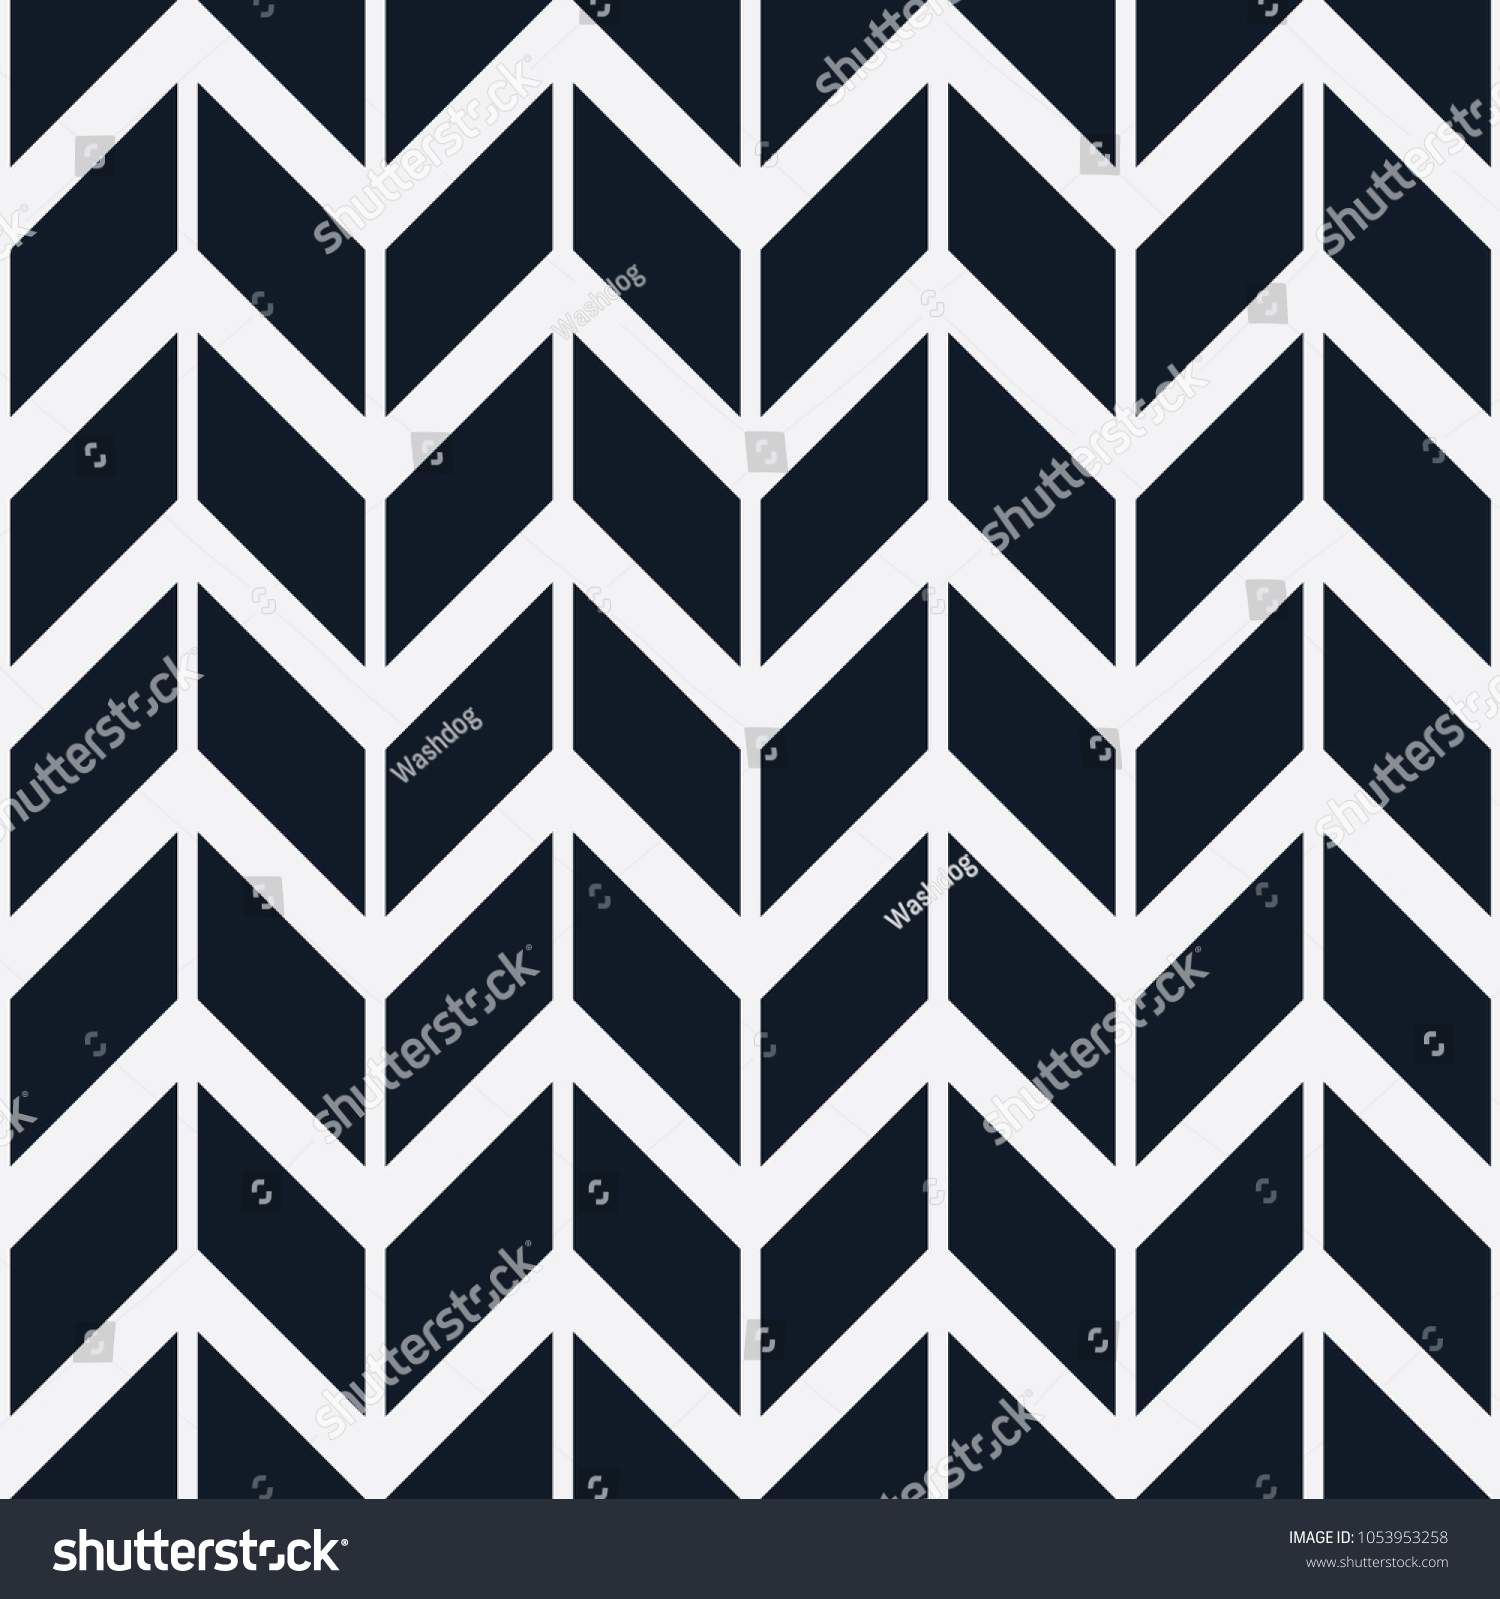 Chevron pattern background, Arrow pattern seamless, Navy and white pattern, Vector #1053953258